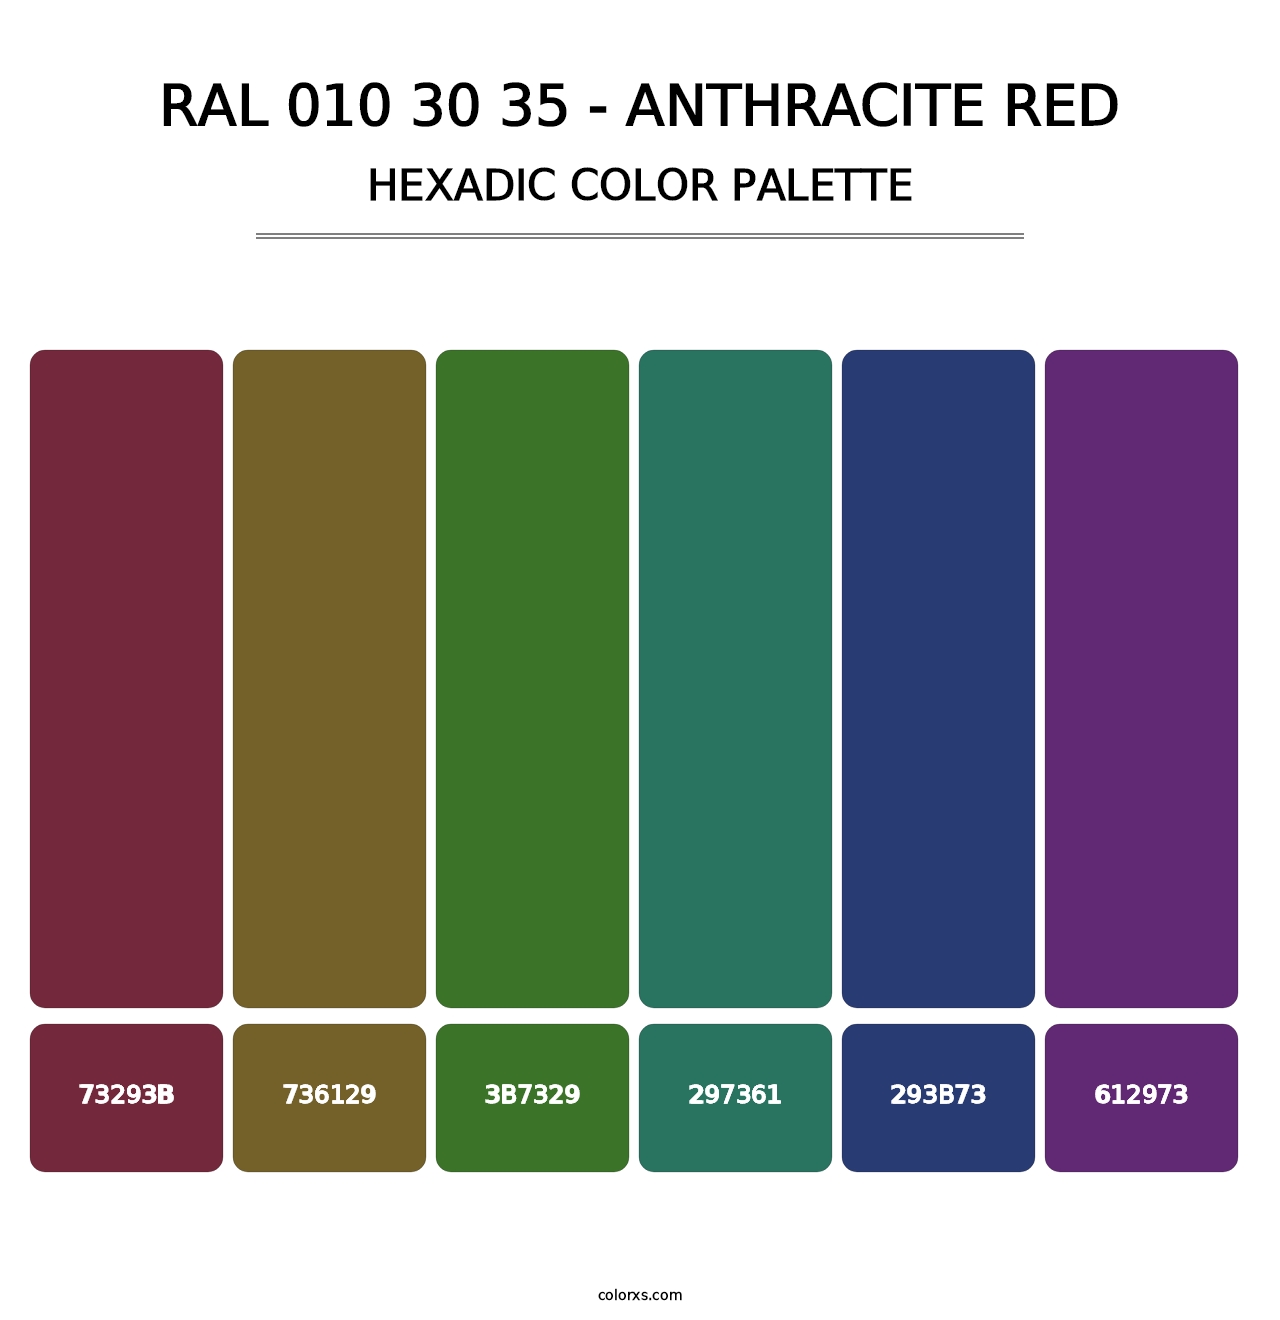 RAL 010 30 35 - Anthracite Red - Hexadic Color Palette